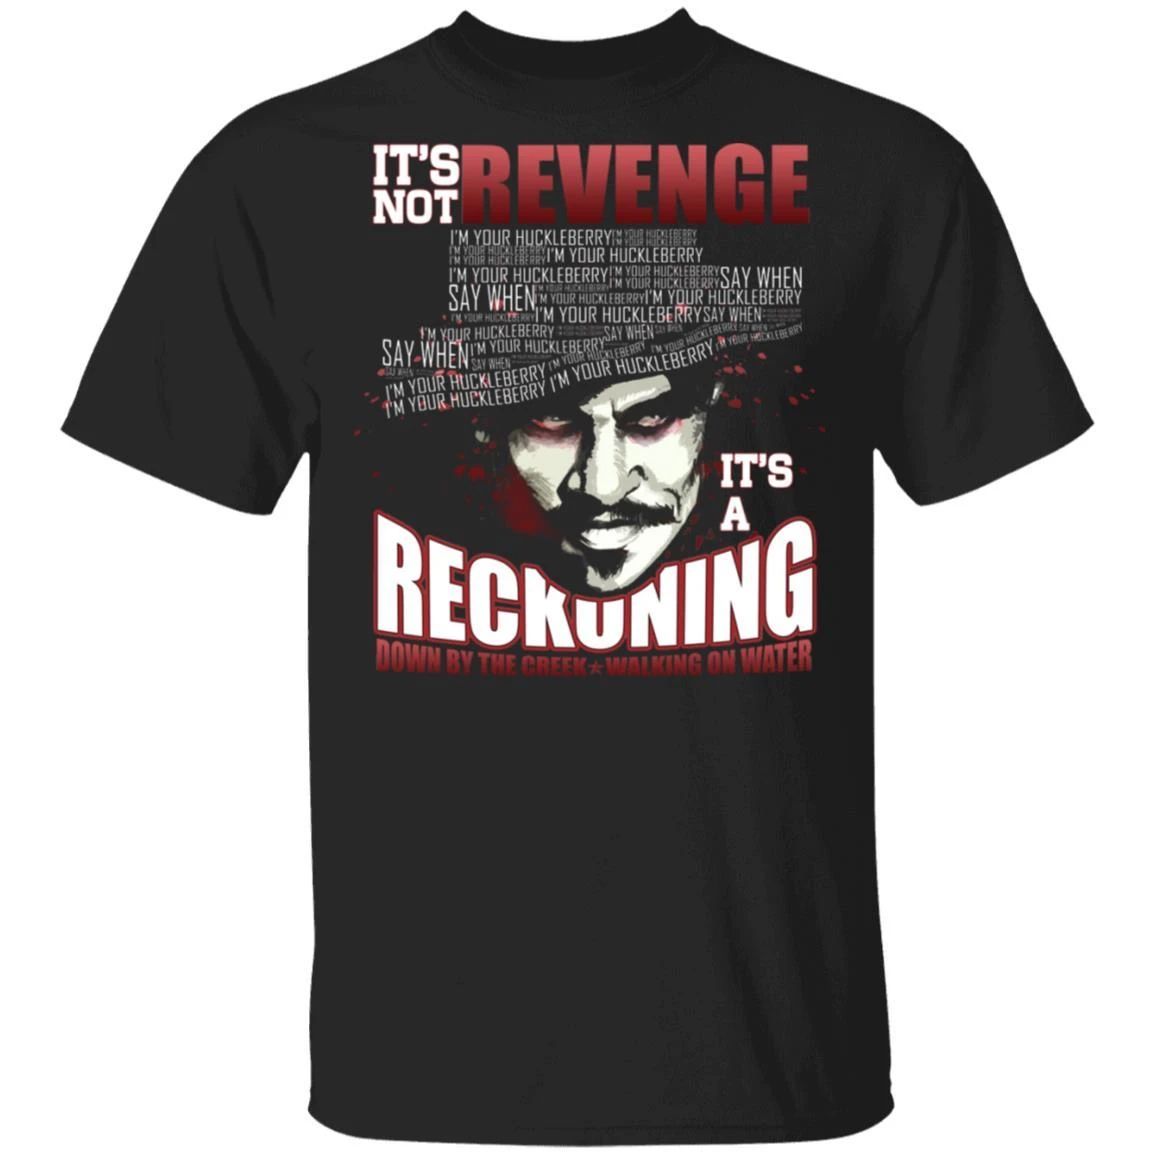 Tombstone T-shirt It’s Not Revenge It’s A Reckoning Tee